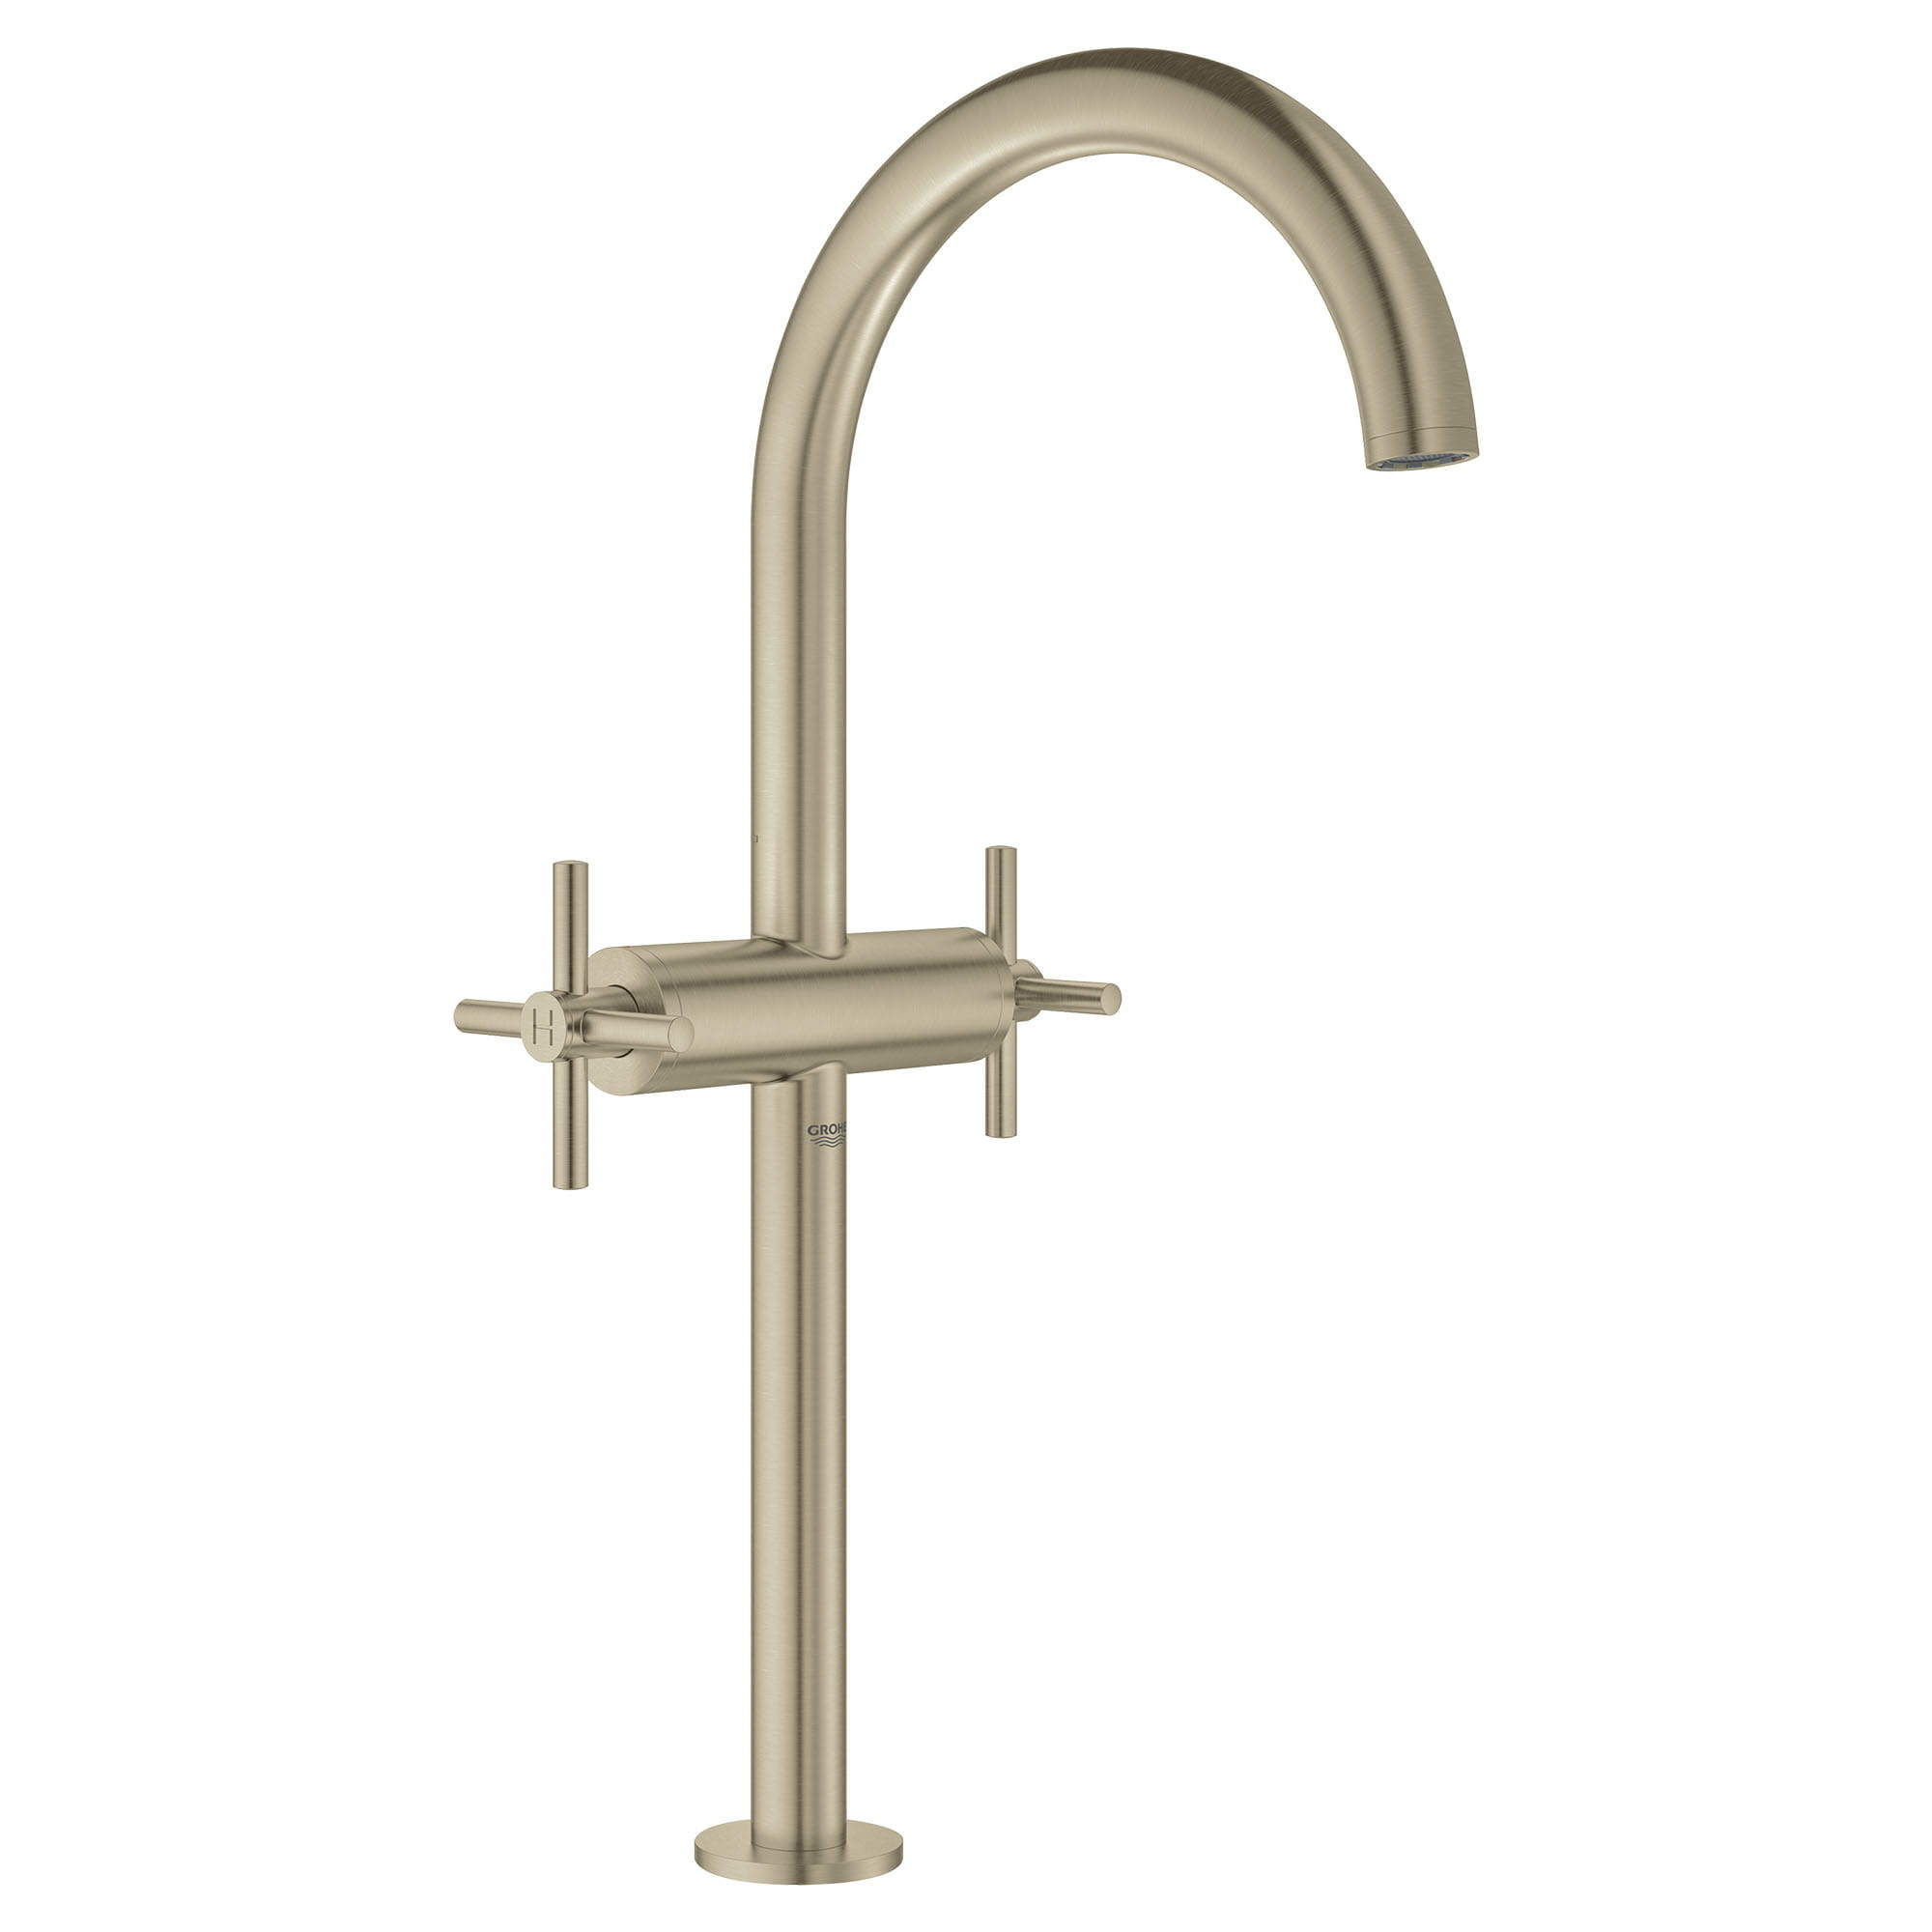 Single Hole Two Handle Deck Mount Vessel Sink Faucet 12 GPM GROHE BRUSHED NICKEL